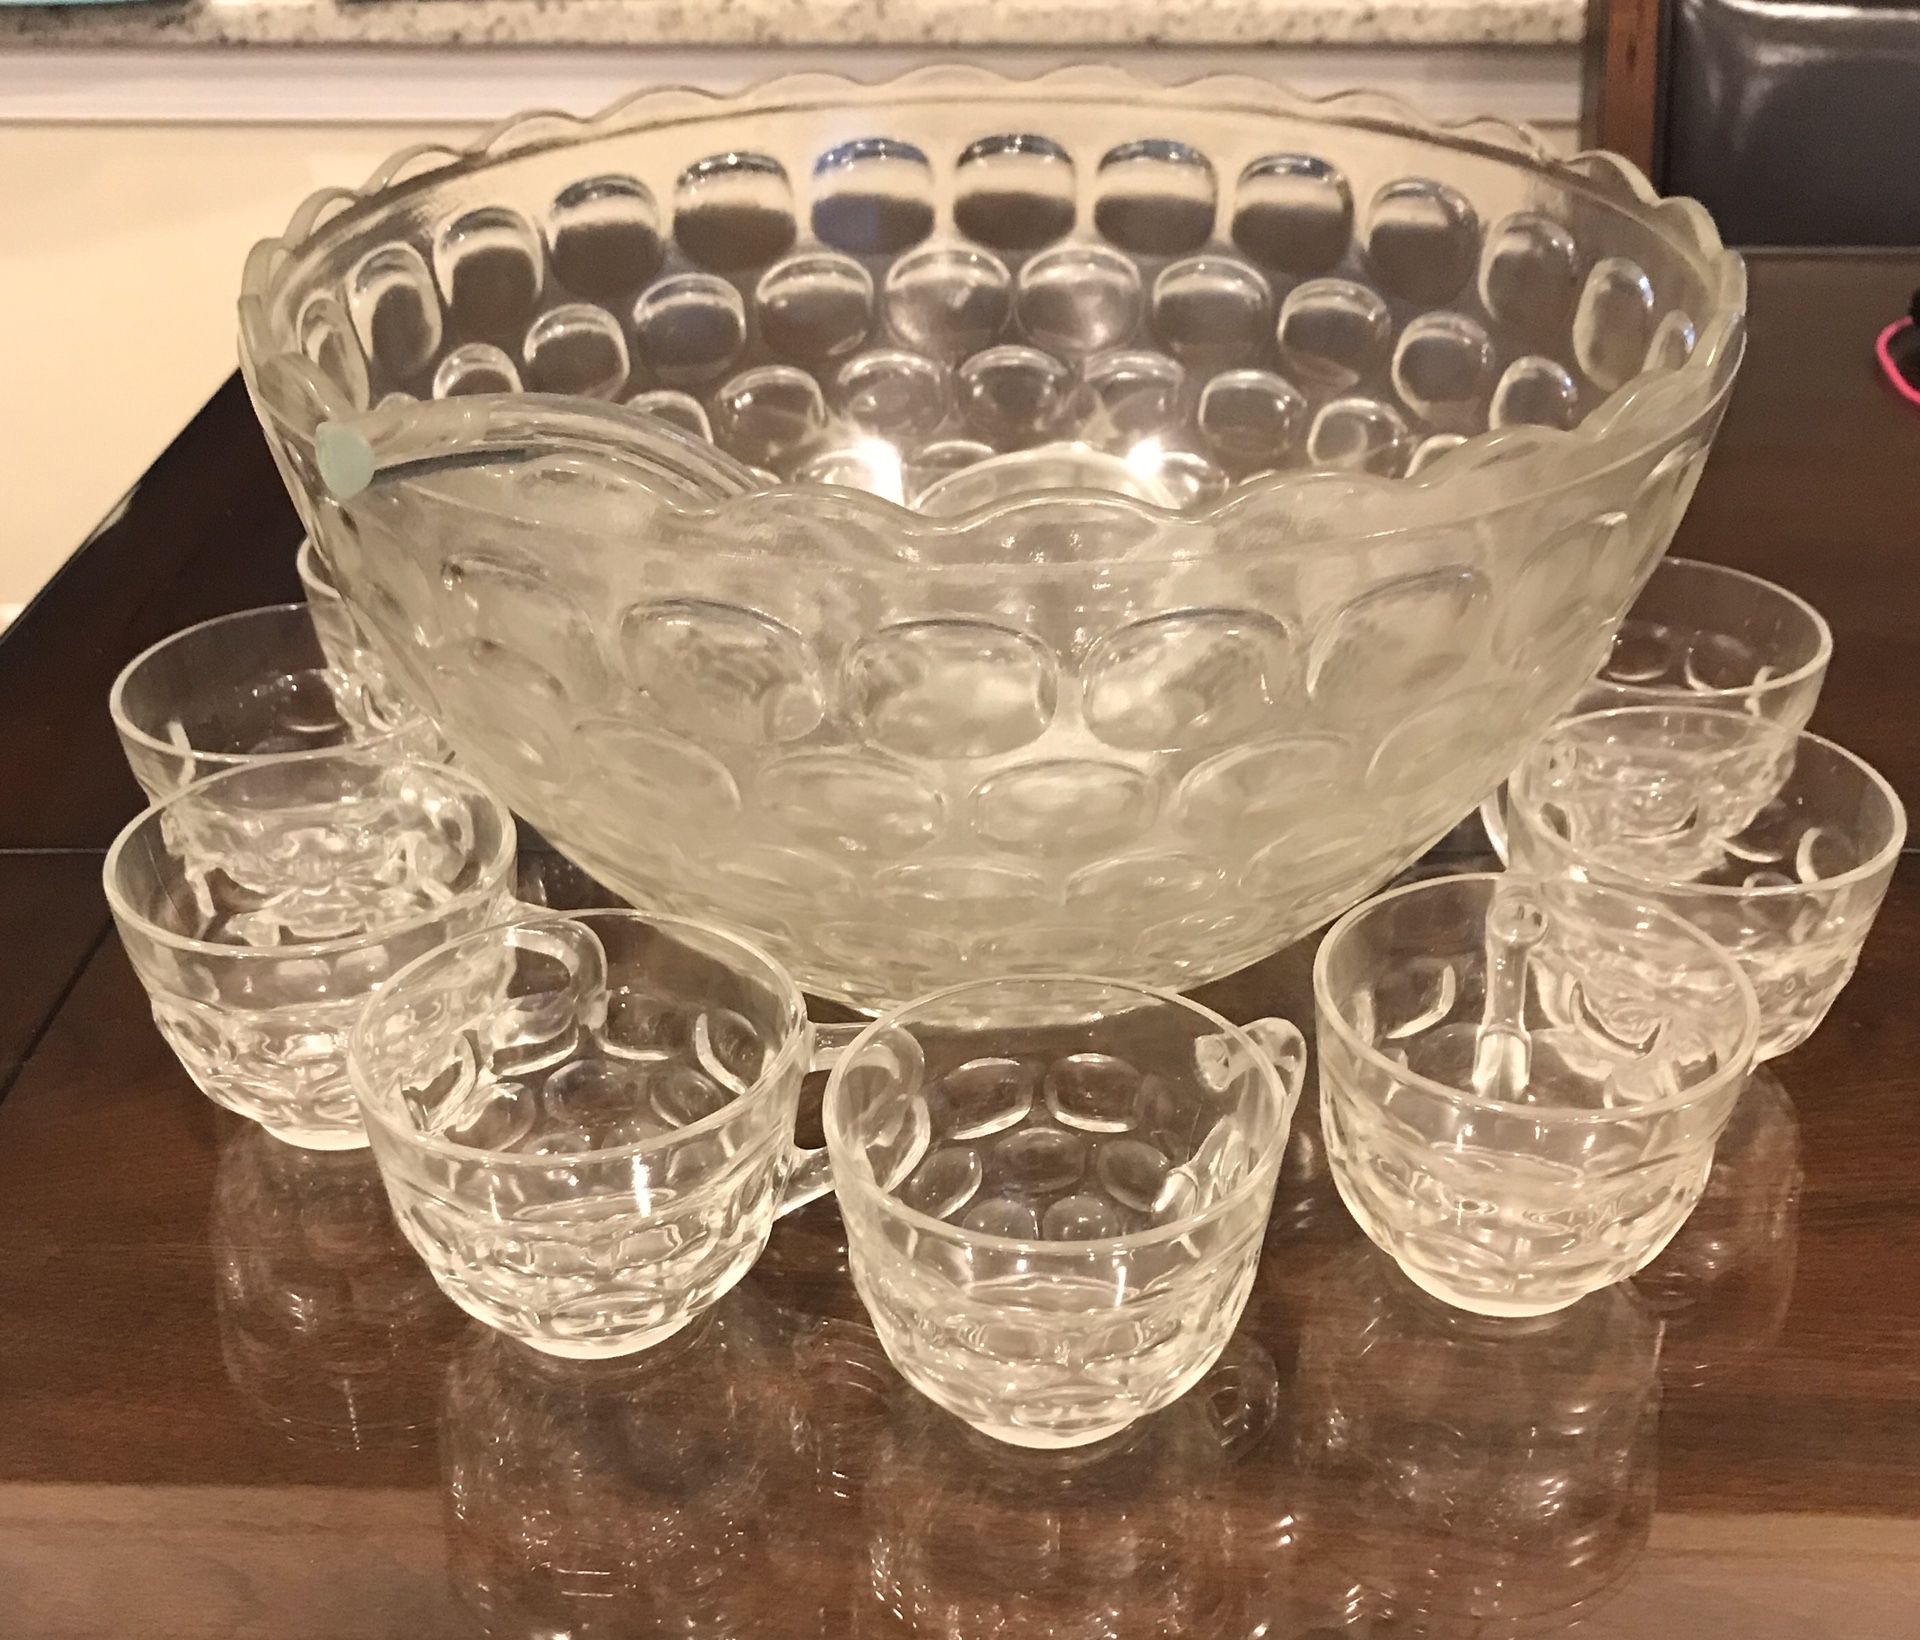 Punch bowl set with ladle with 17 cups